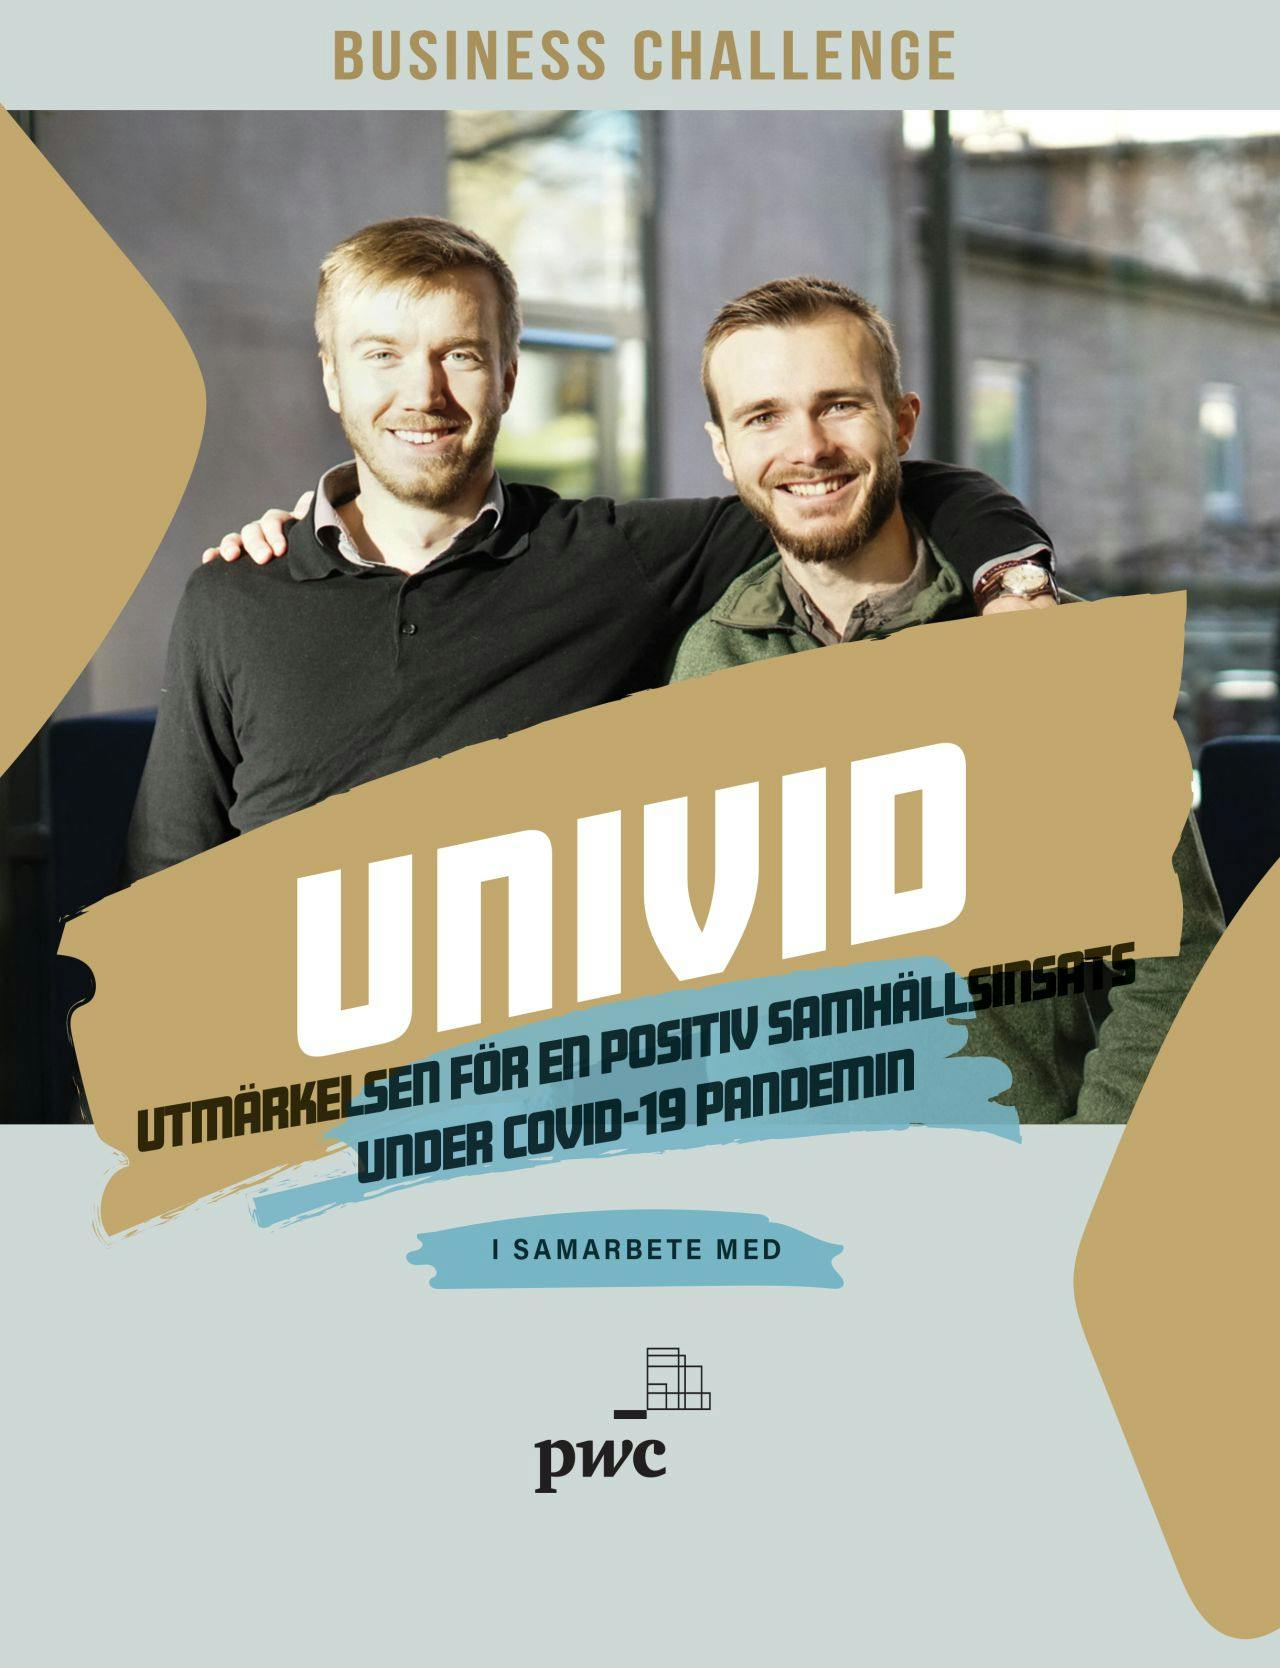 Univid wins the category 'Positive Societal Impact during the COVID-19 pandemic' in Business Challenge. Business Challenge is an annual competition and network that has a large flow of startups and selects the most exciting companies with the greatest potential for growth.